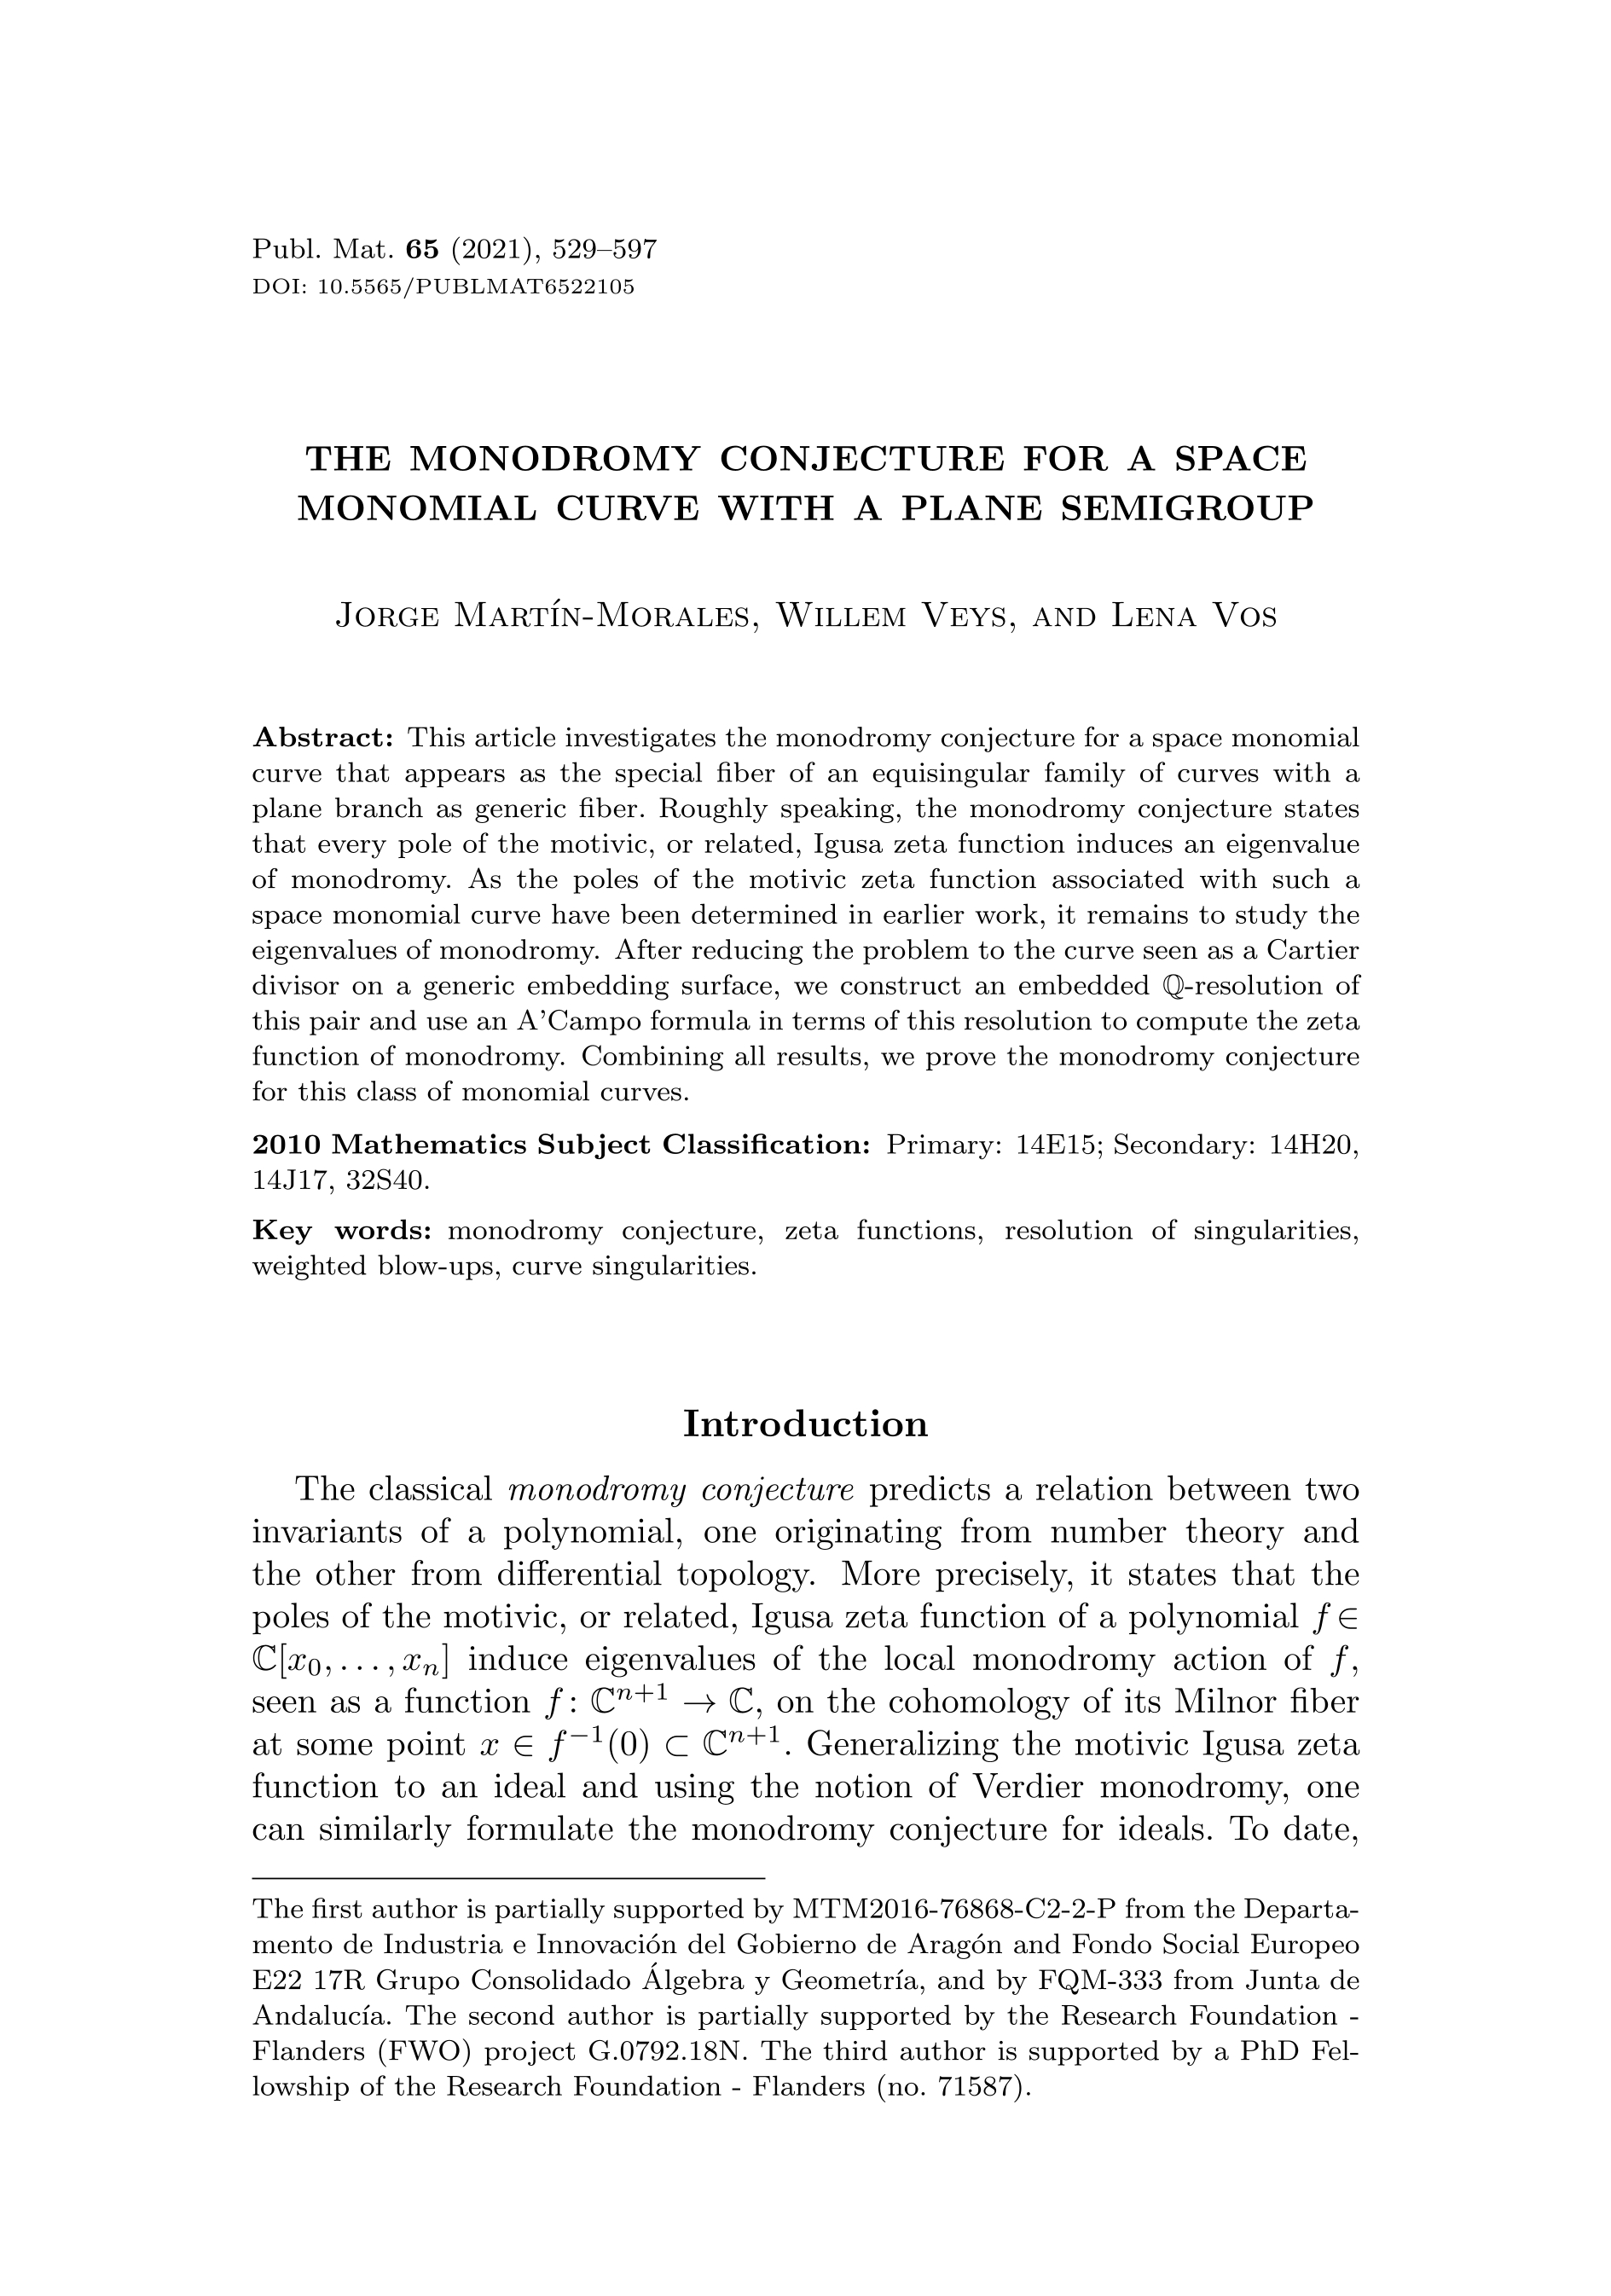 The monodromy conjecture for a space monomial curve with a plane semigroup